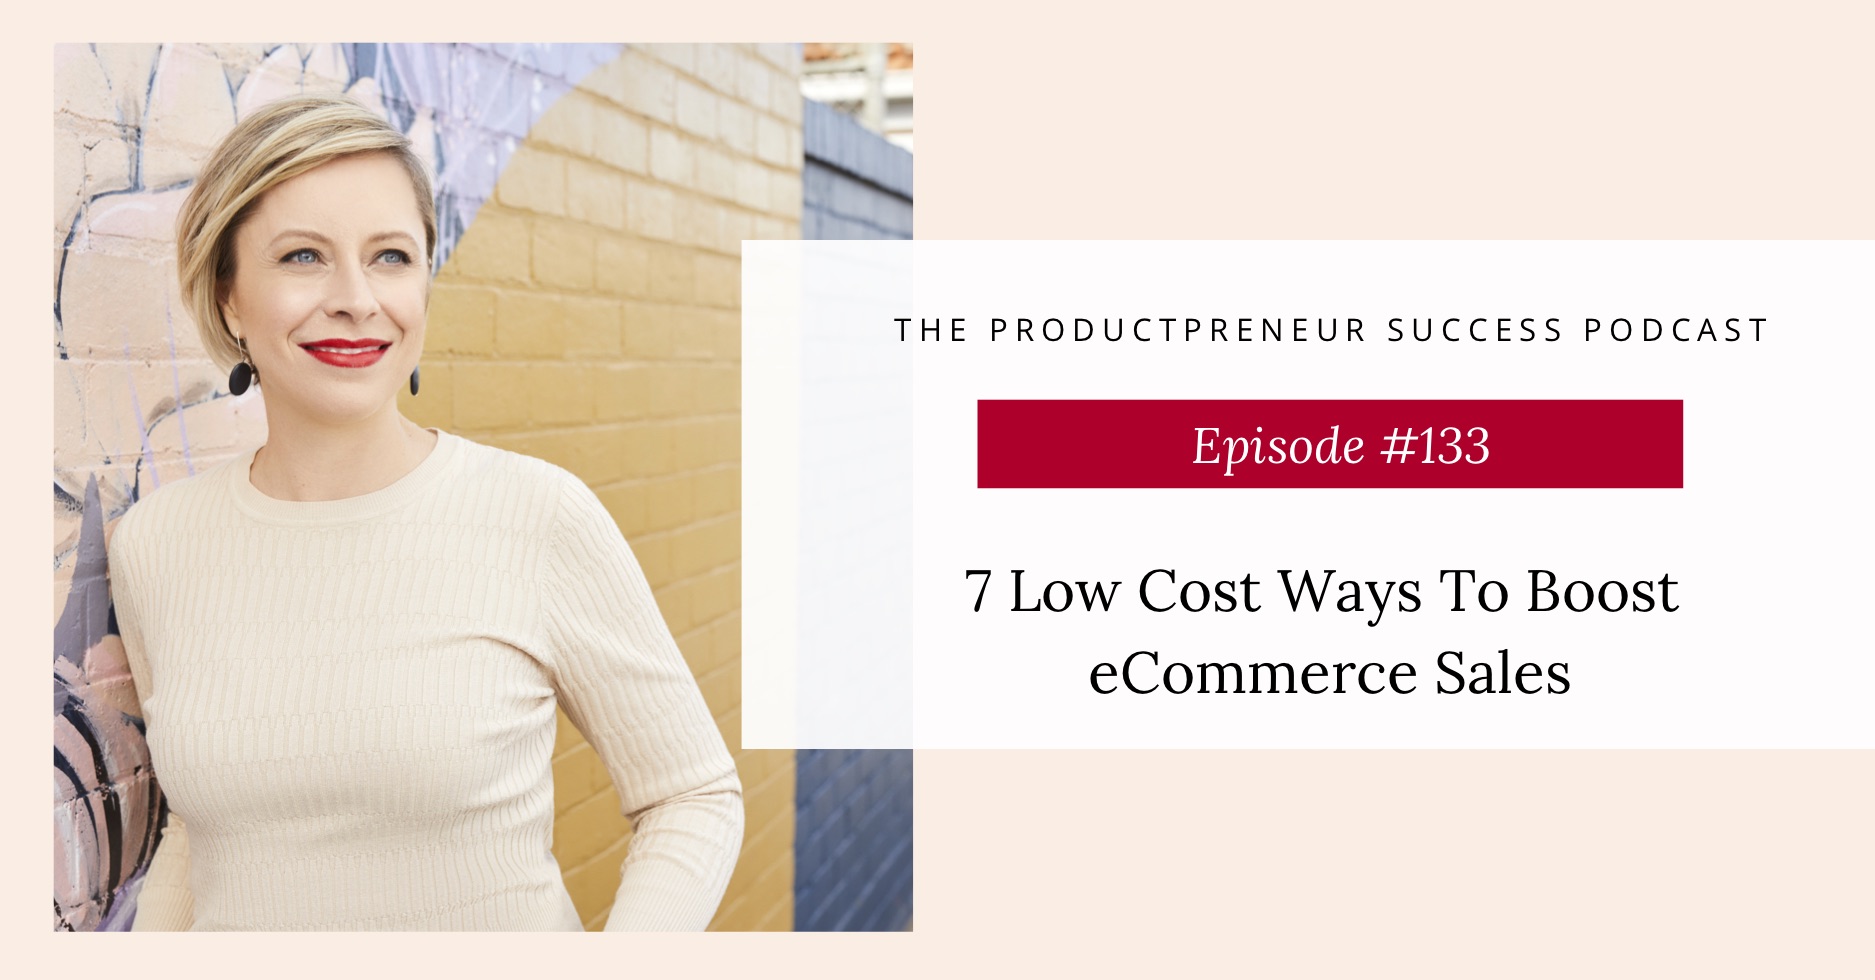 7 low cost marketing ideas to boost ecommerce sales